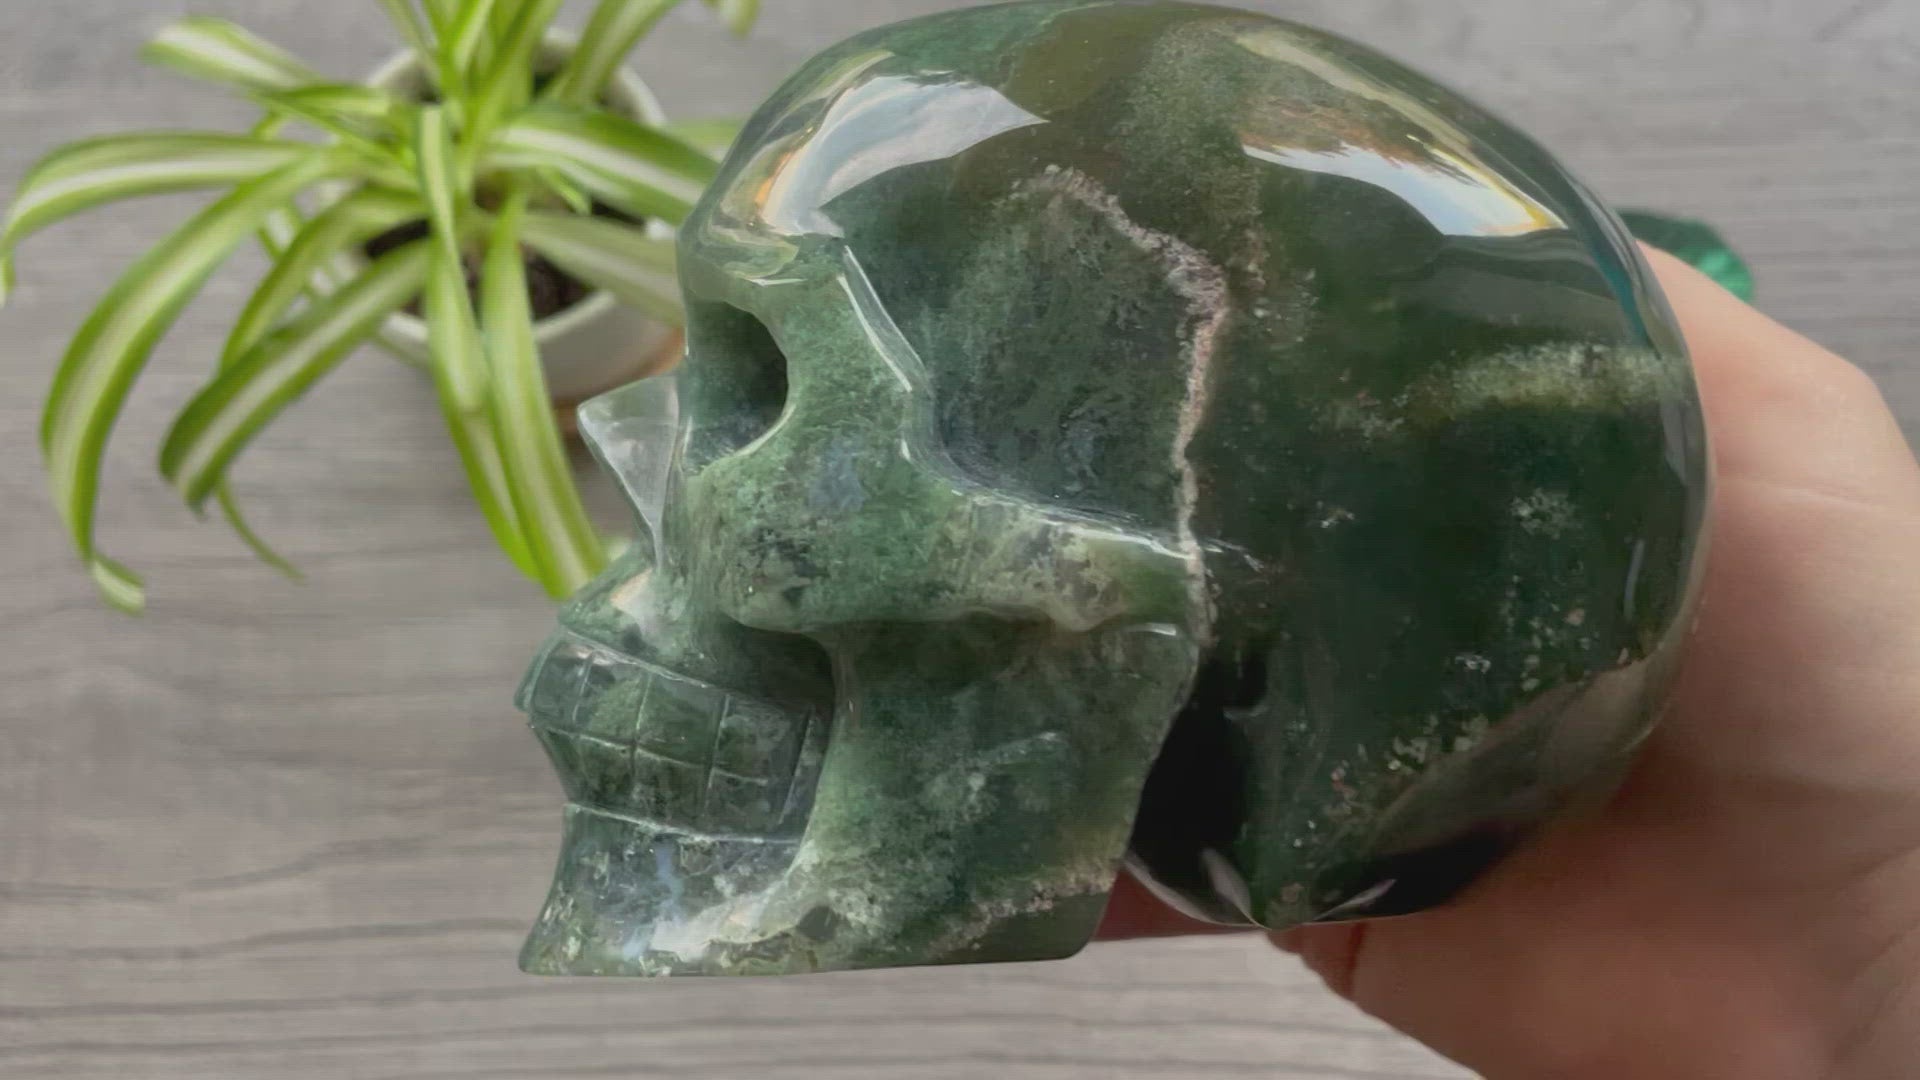 Moss Agate Crystal Skull with Druzy (1.3kg) - The Wandering Fox Emporium, Your Metaphysical Store video